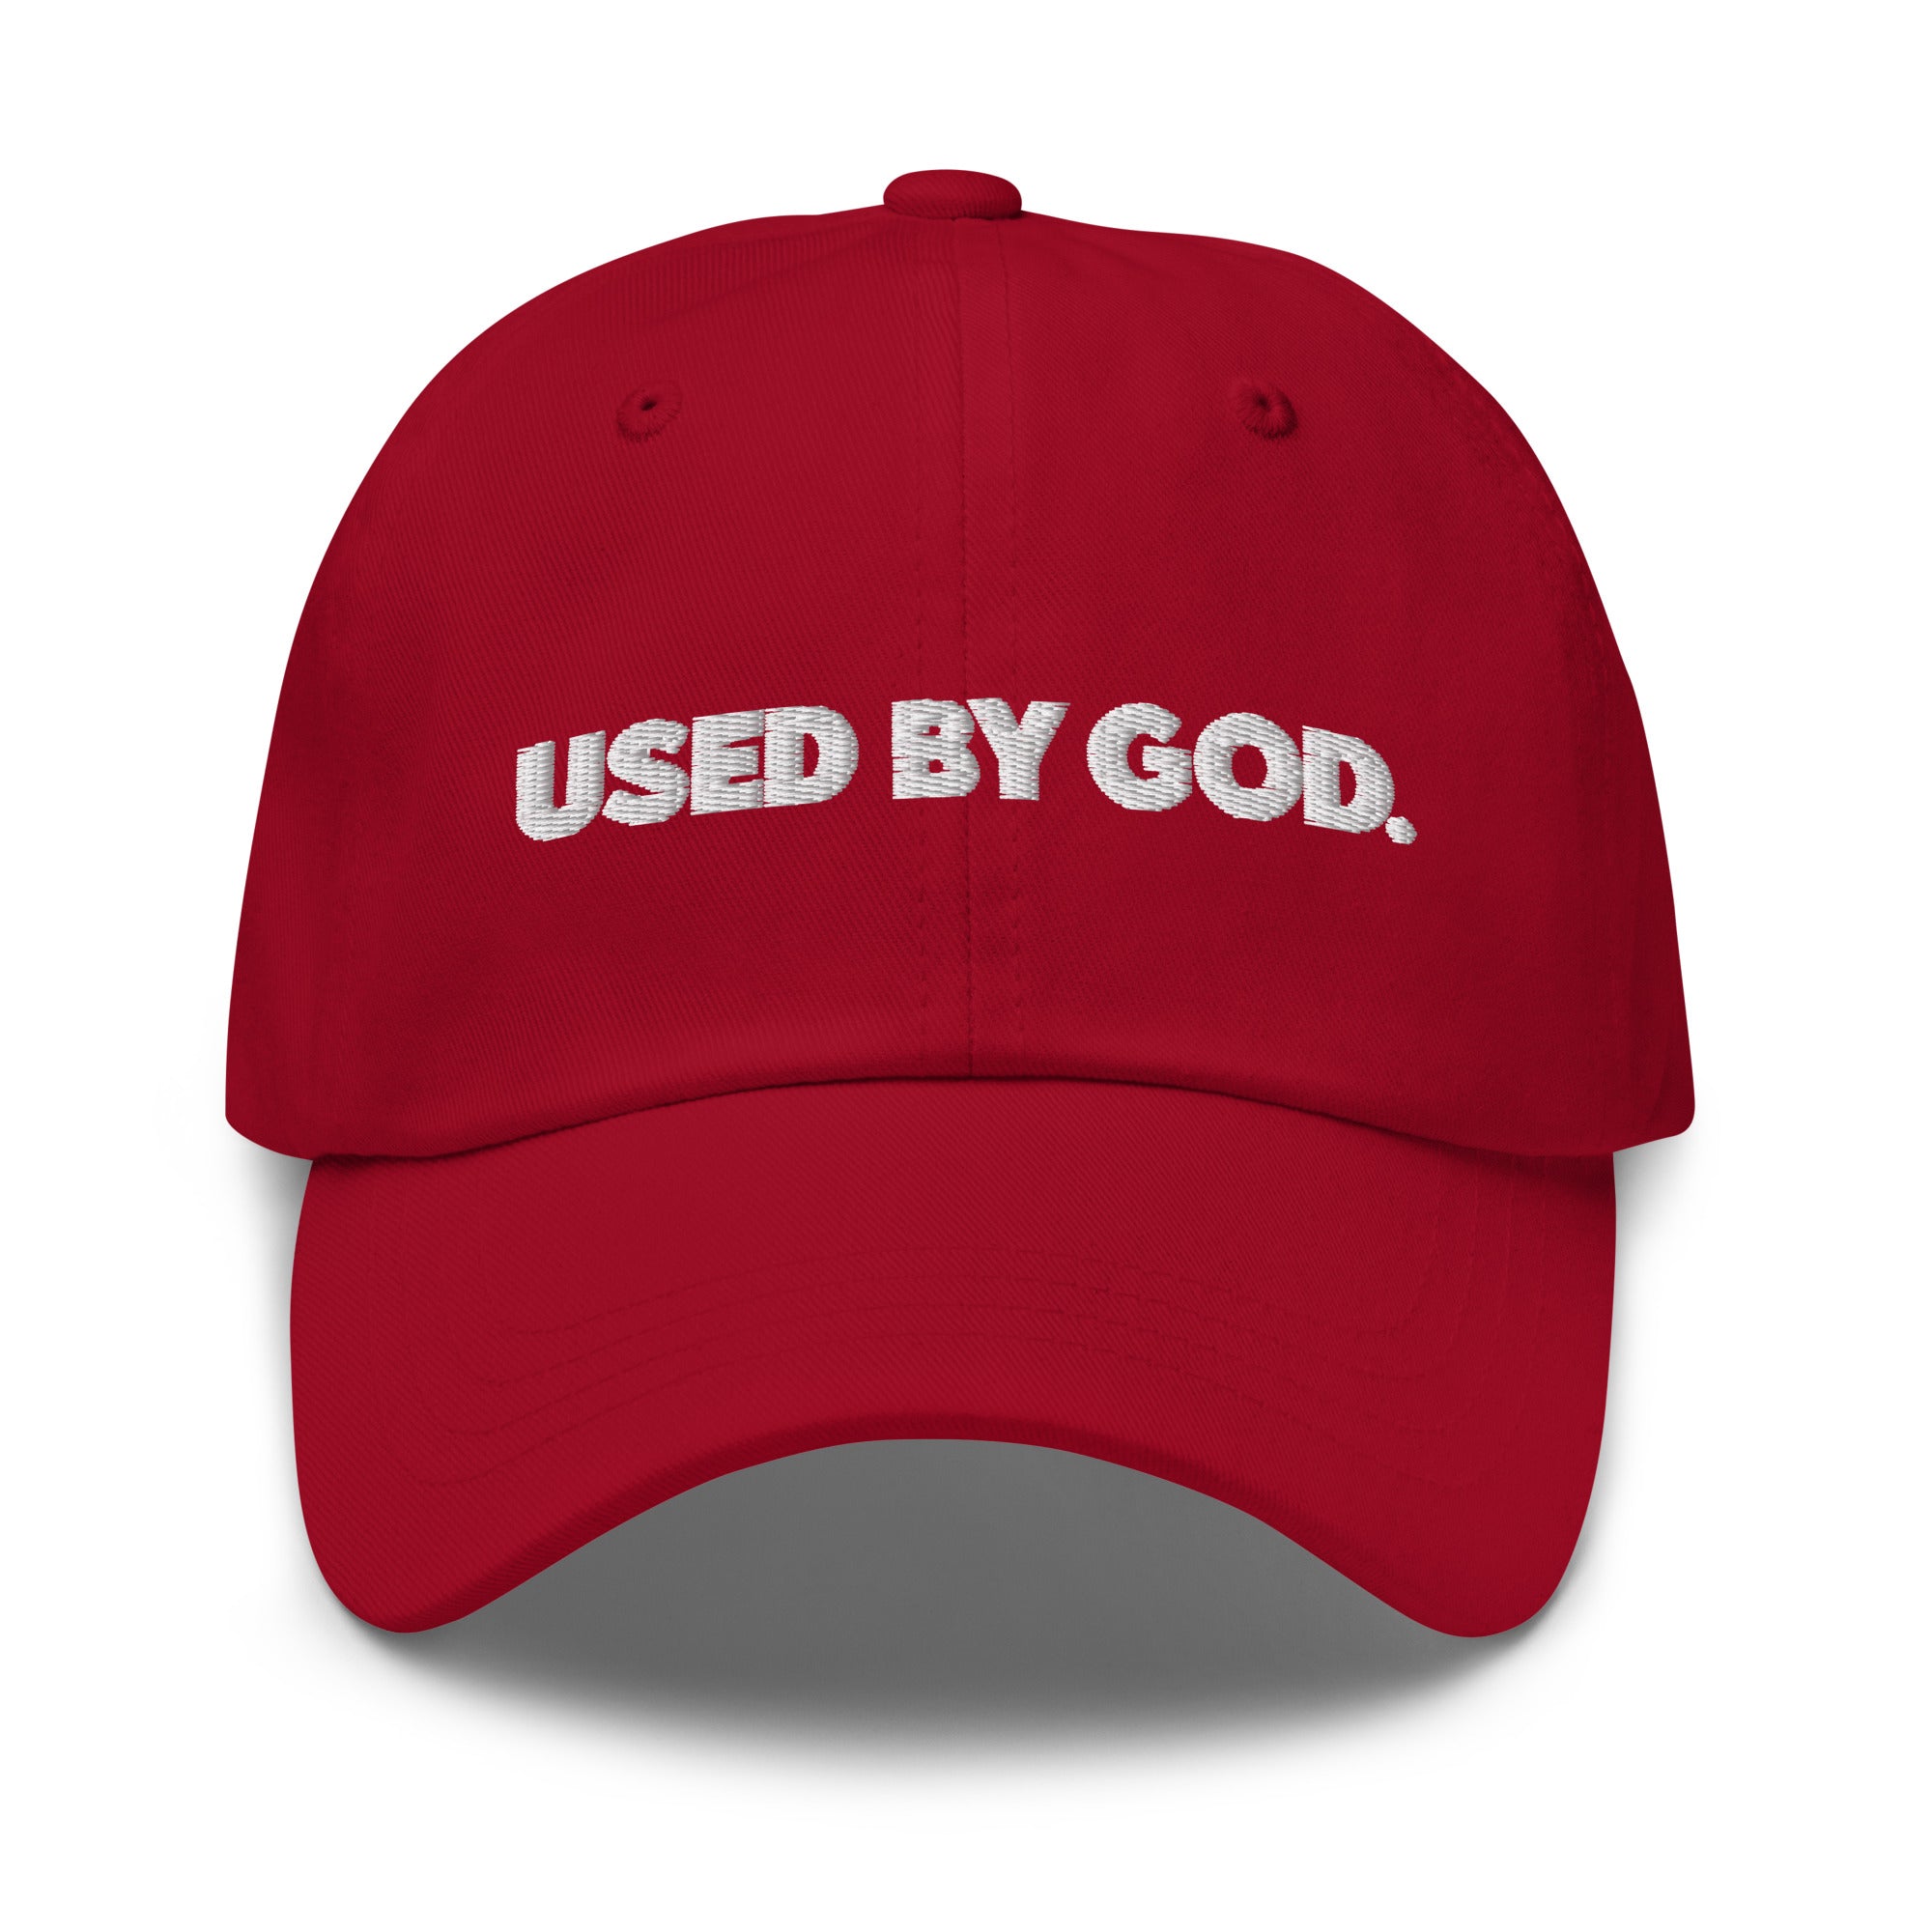 UBG Dad Cap, Used By God, Used By God Clothing, Christian Apparel, Christian Hats, Christian T-Shirts, Christian Clothing, God Shirts, Christian Sweatshirts, God Clothing, Jesus Hoodie, Jesus Clothes, God Is Dope, Art Of Homage, Red Letter Clothing, Elevated Faith, Active Faith Sports, Beacon Threads, God The Father Apparel